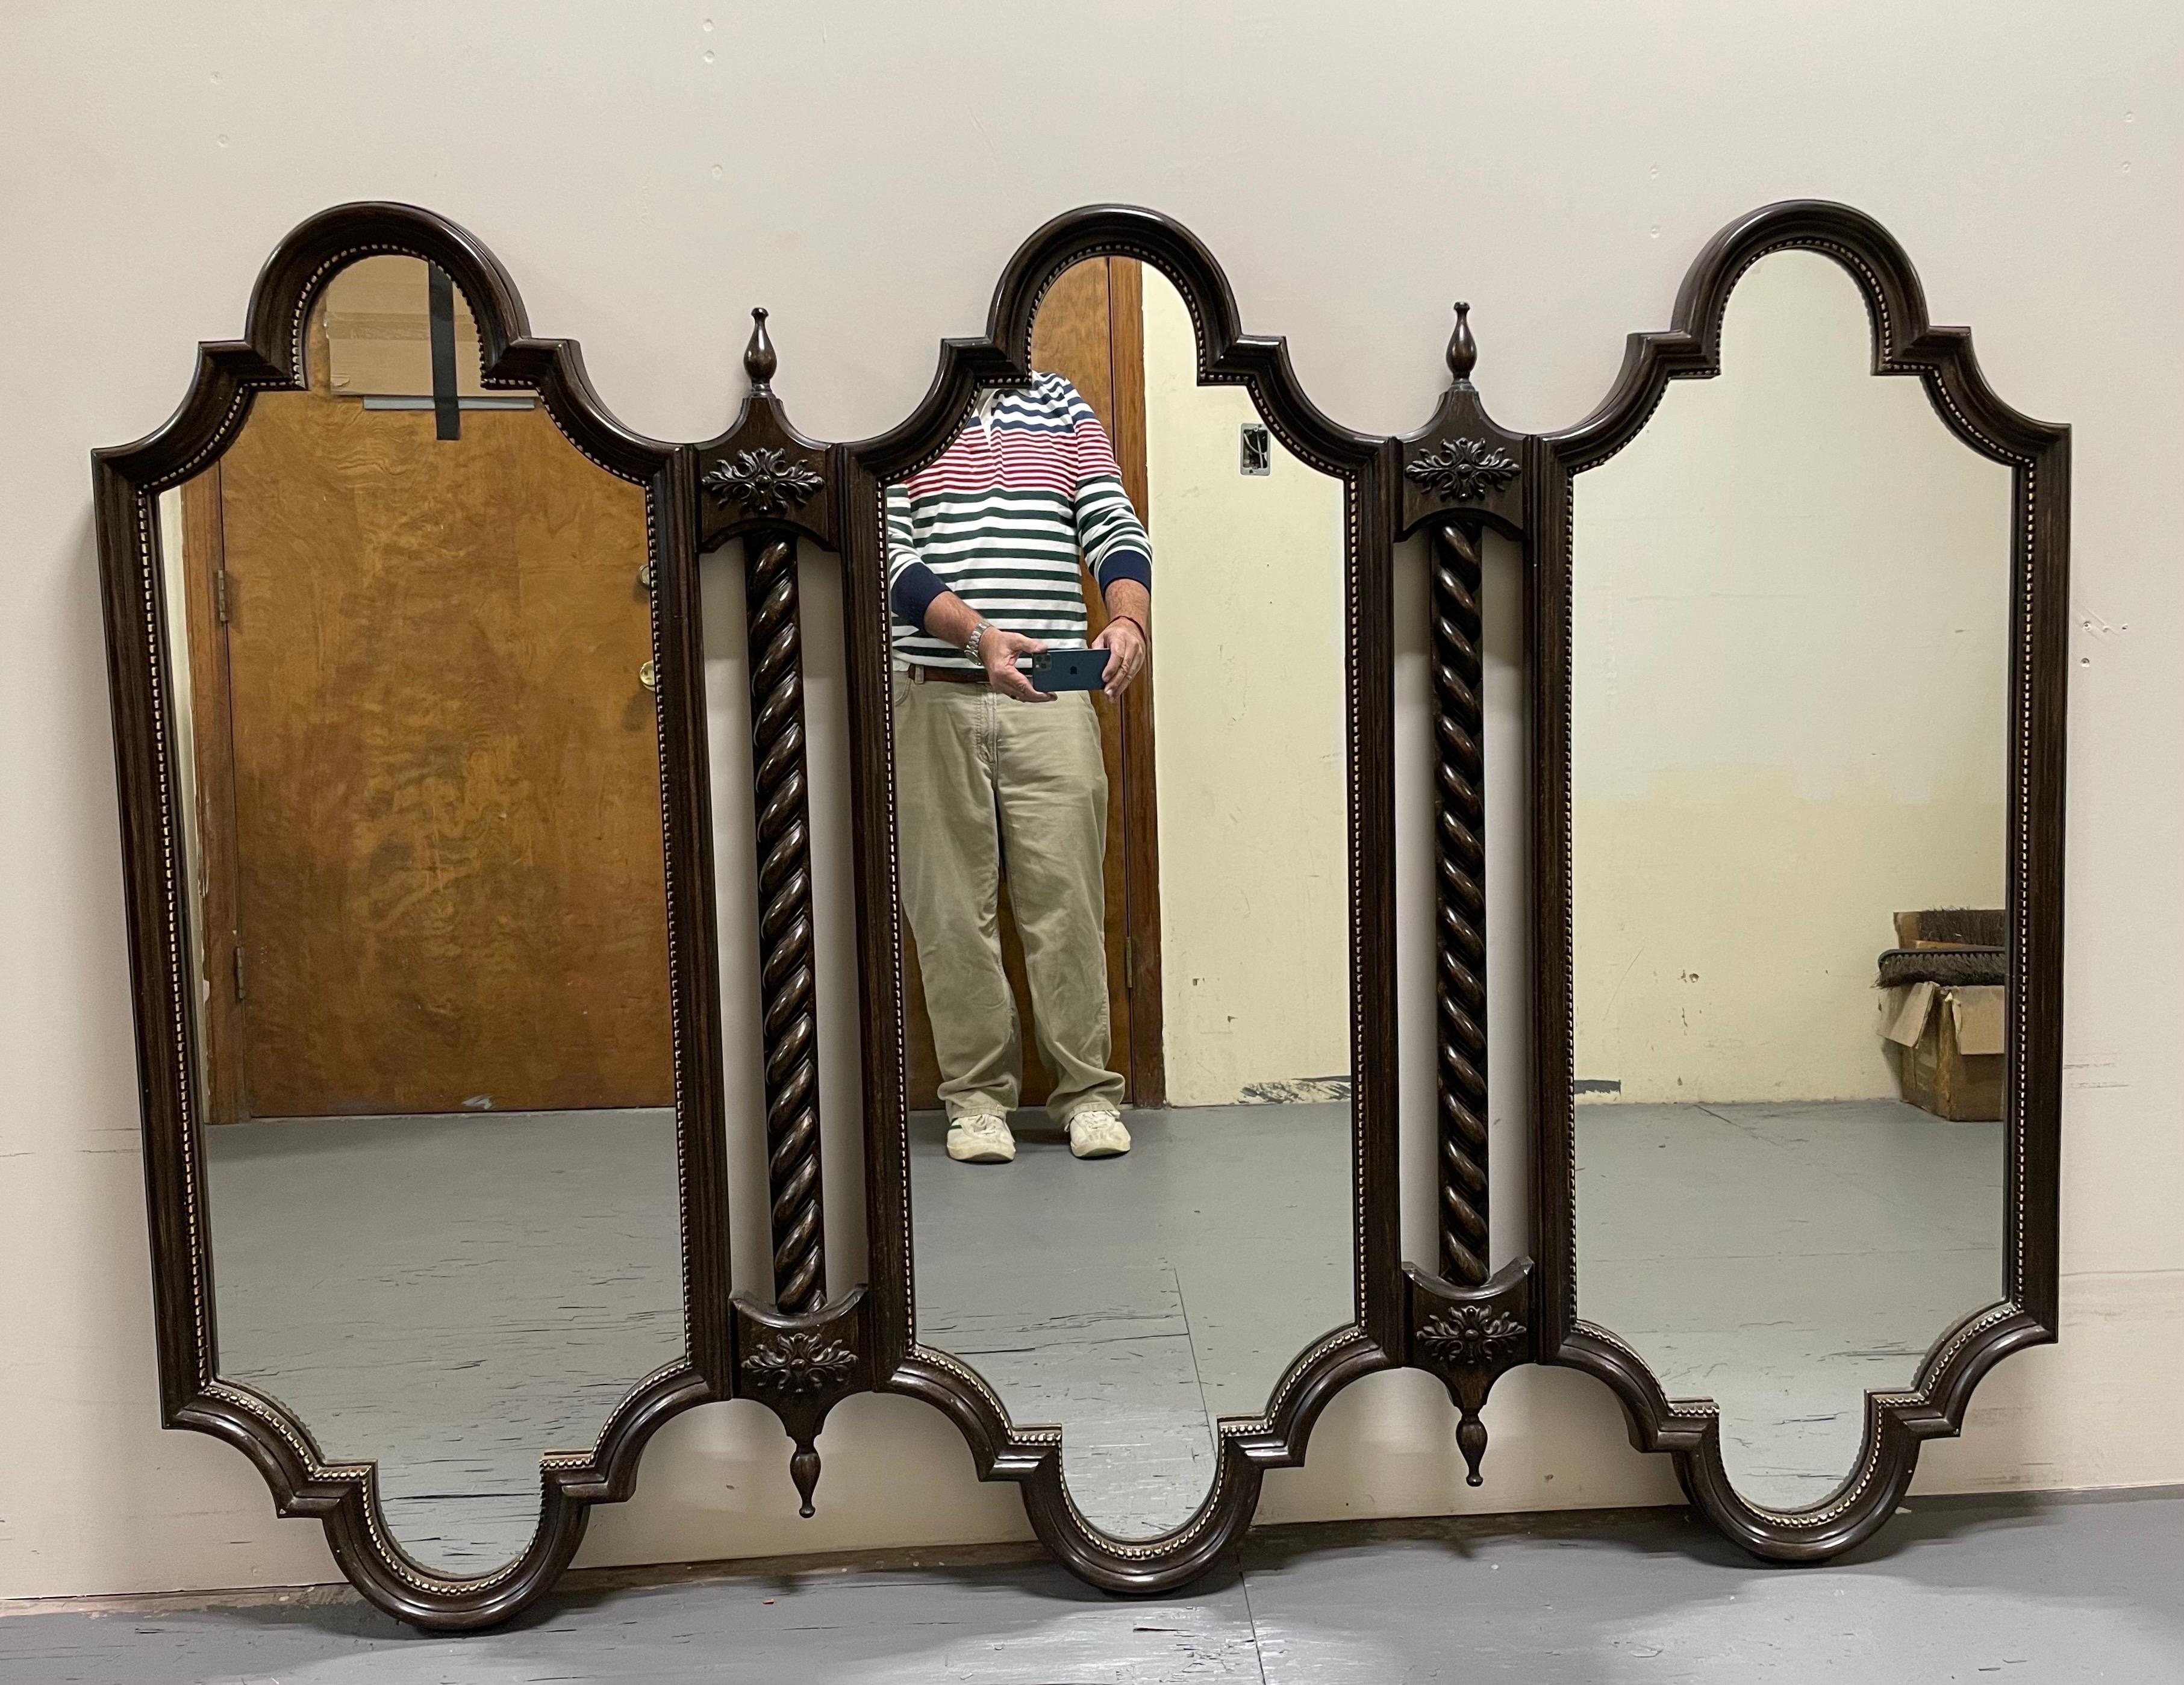 Wonderful Mediterranean triple mirror. Great arching design with finials, scroll, and bead work. Massive in size and weight.
I can deliver curbside to NYC or Philly for $300.